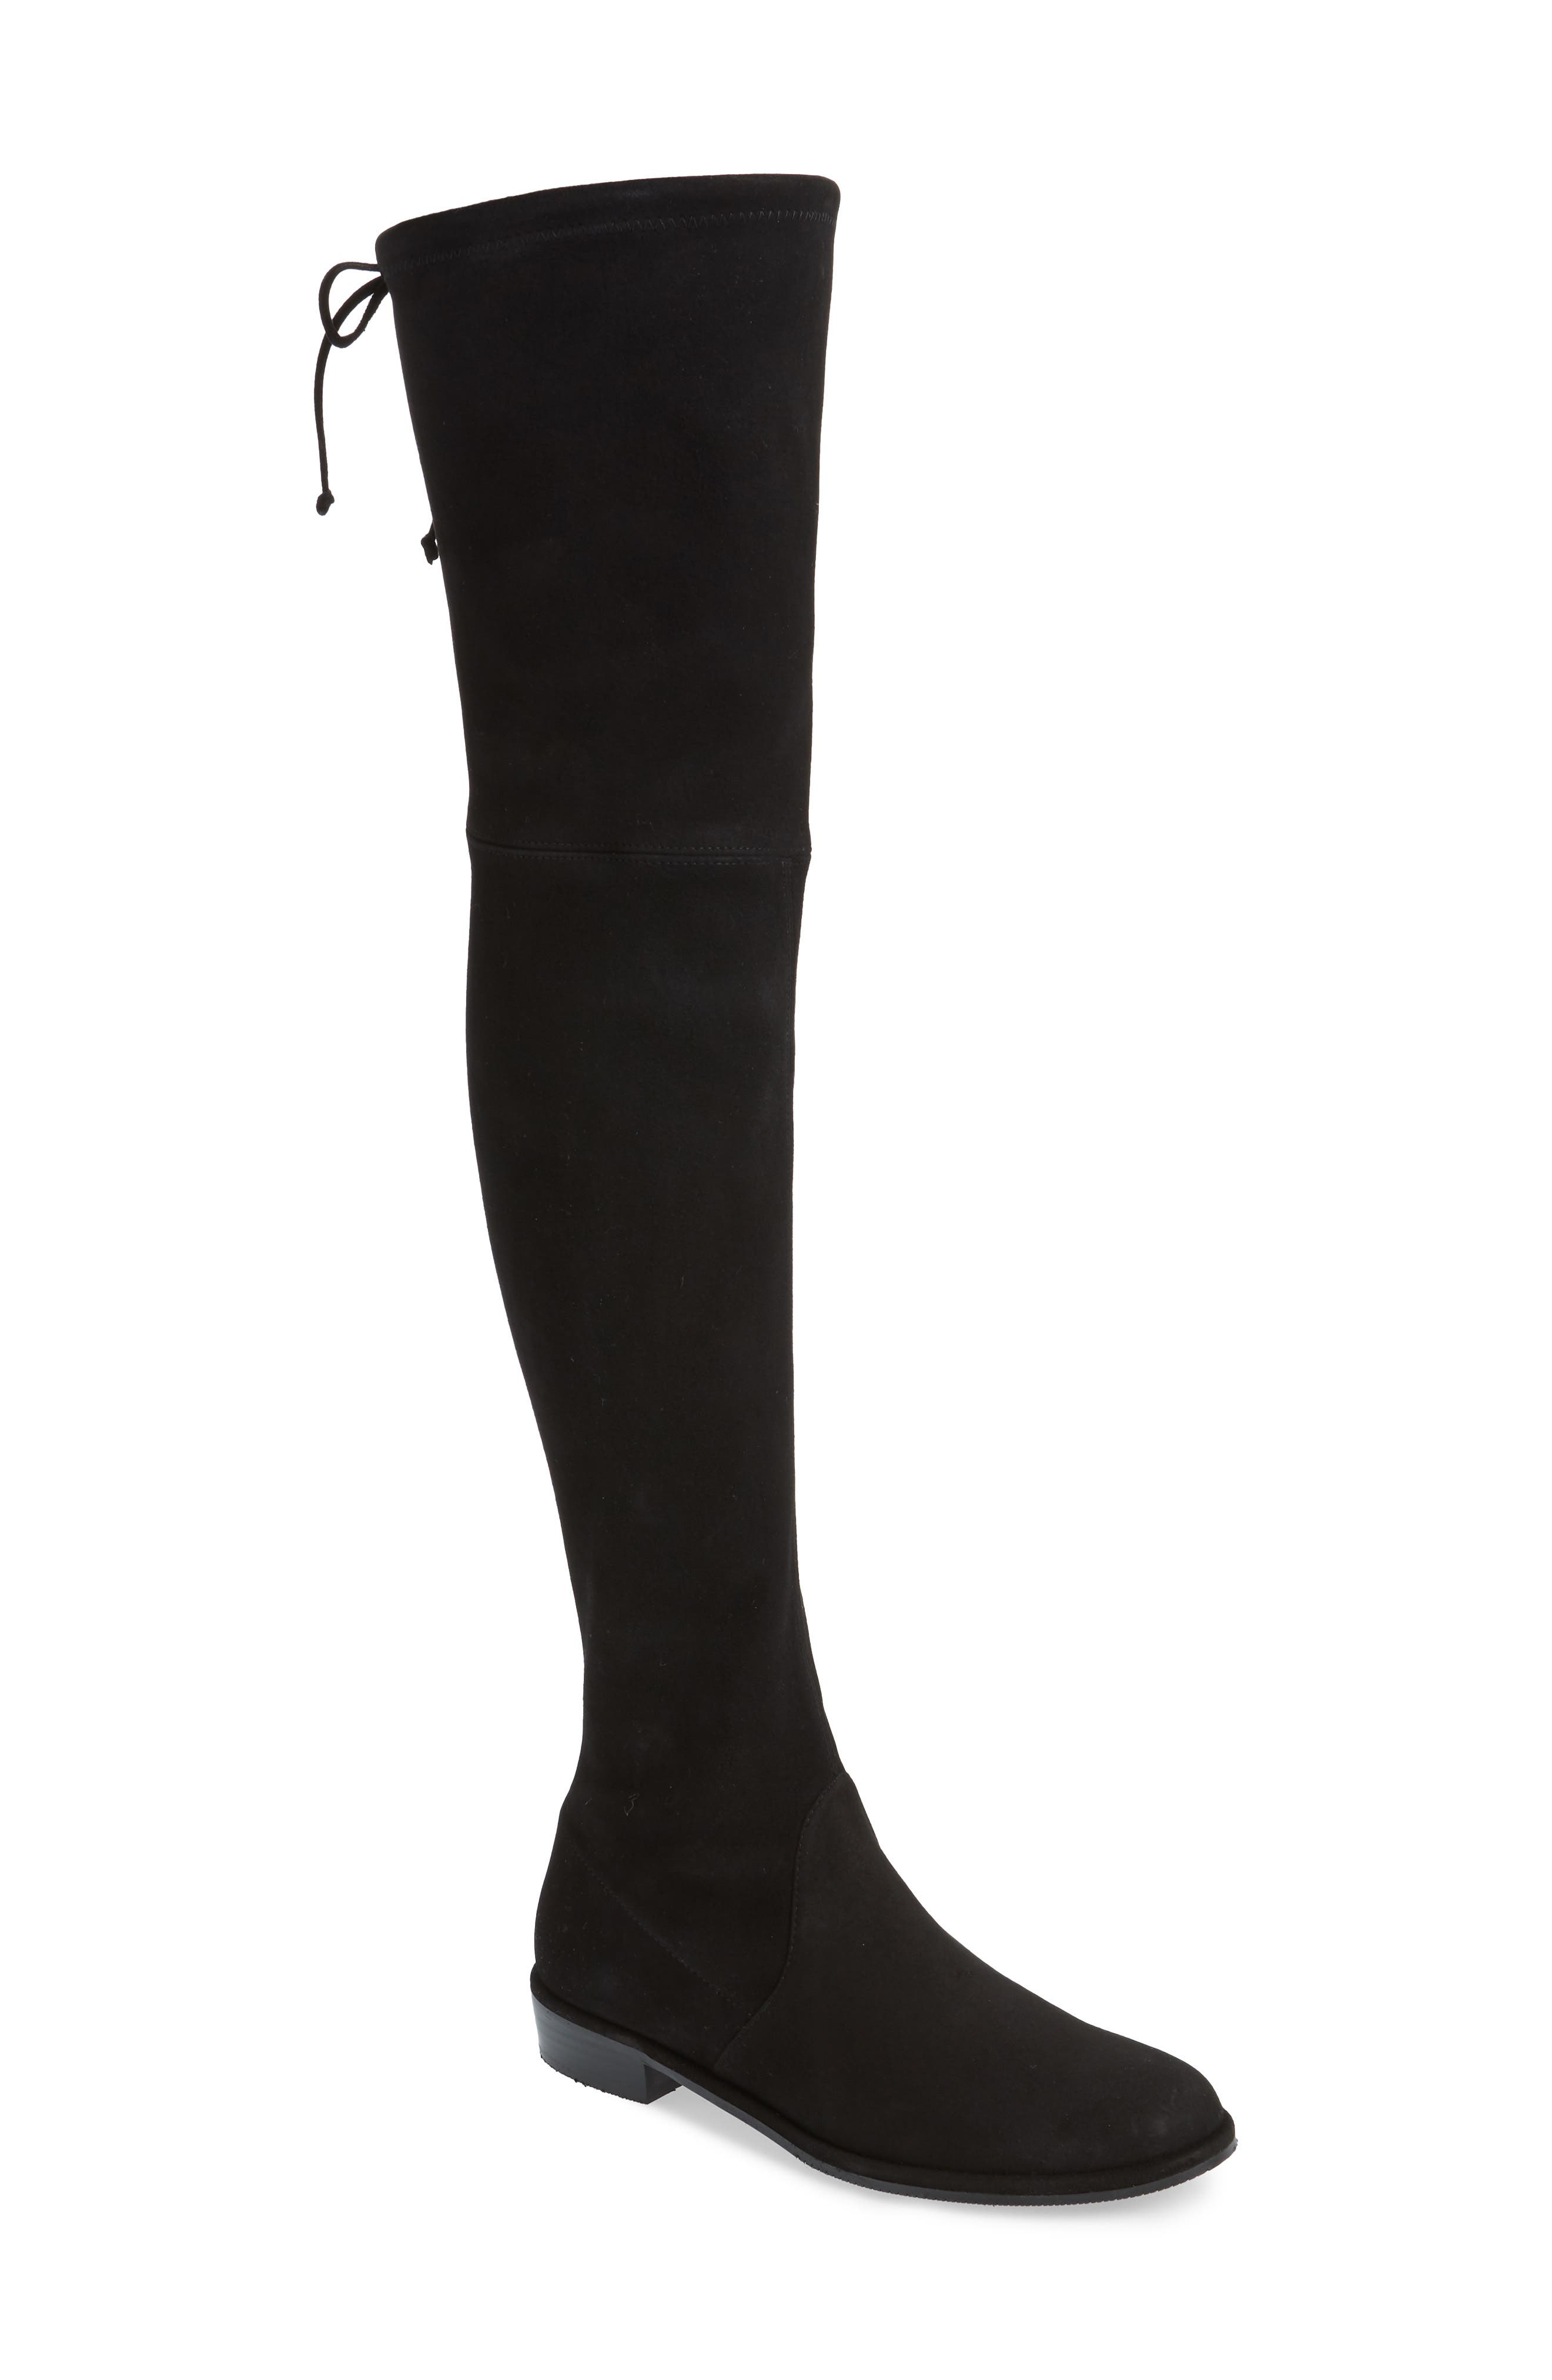 lowland over the knee boots